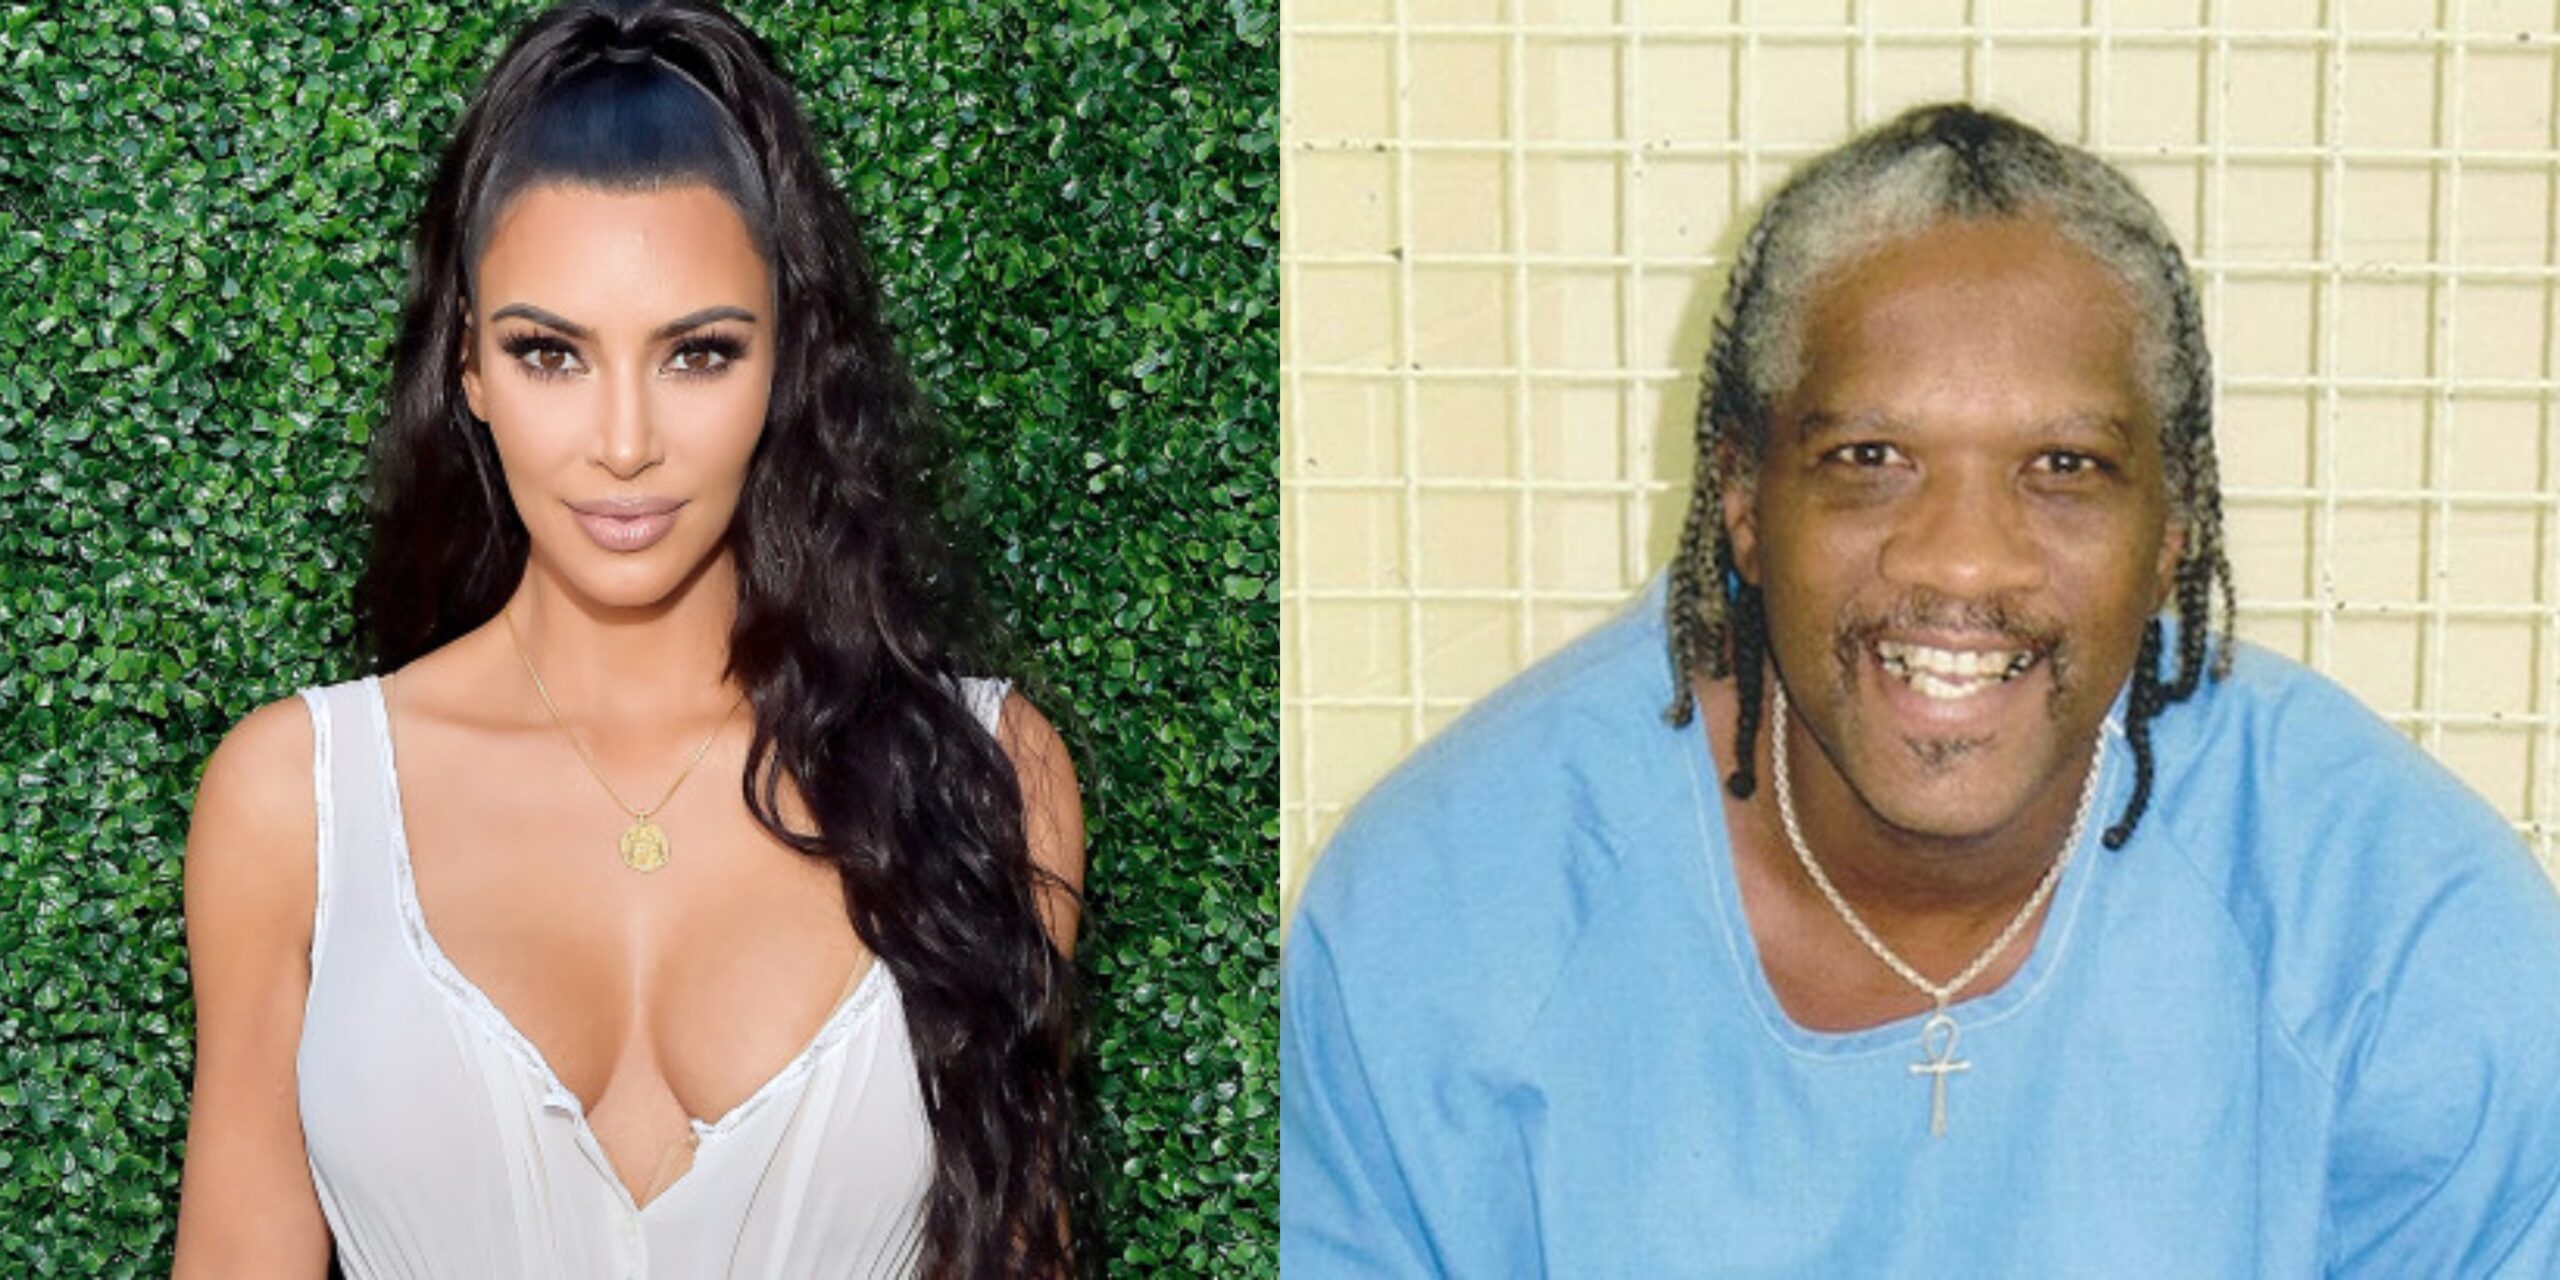 Death Row Inmate Kim Kardashian Tweeted About is Requesting New DNA Test